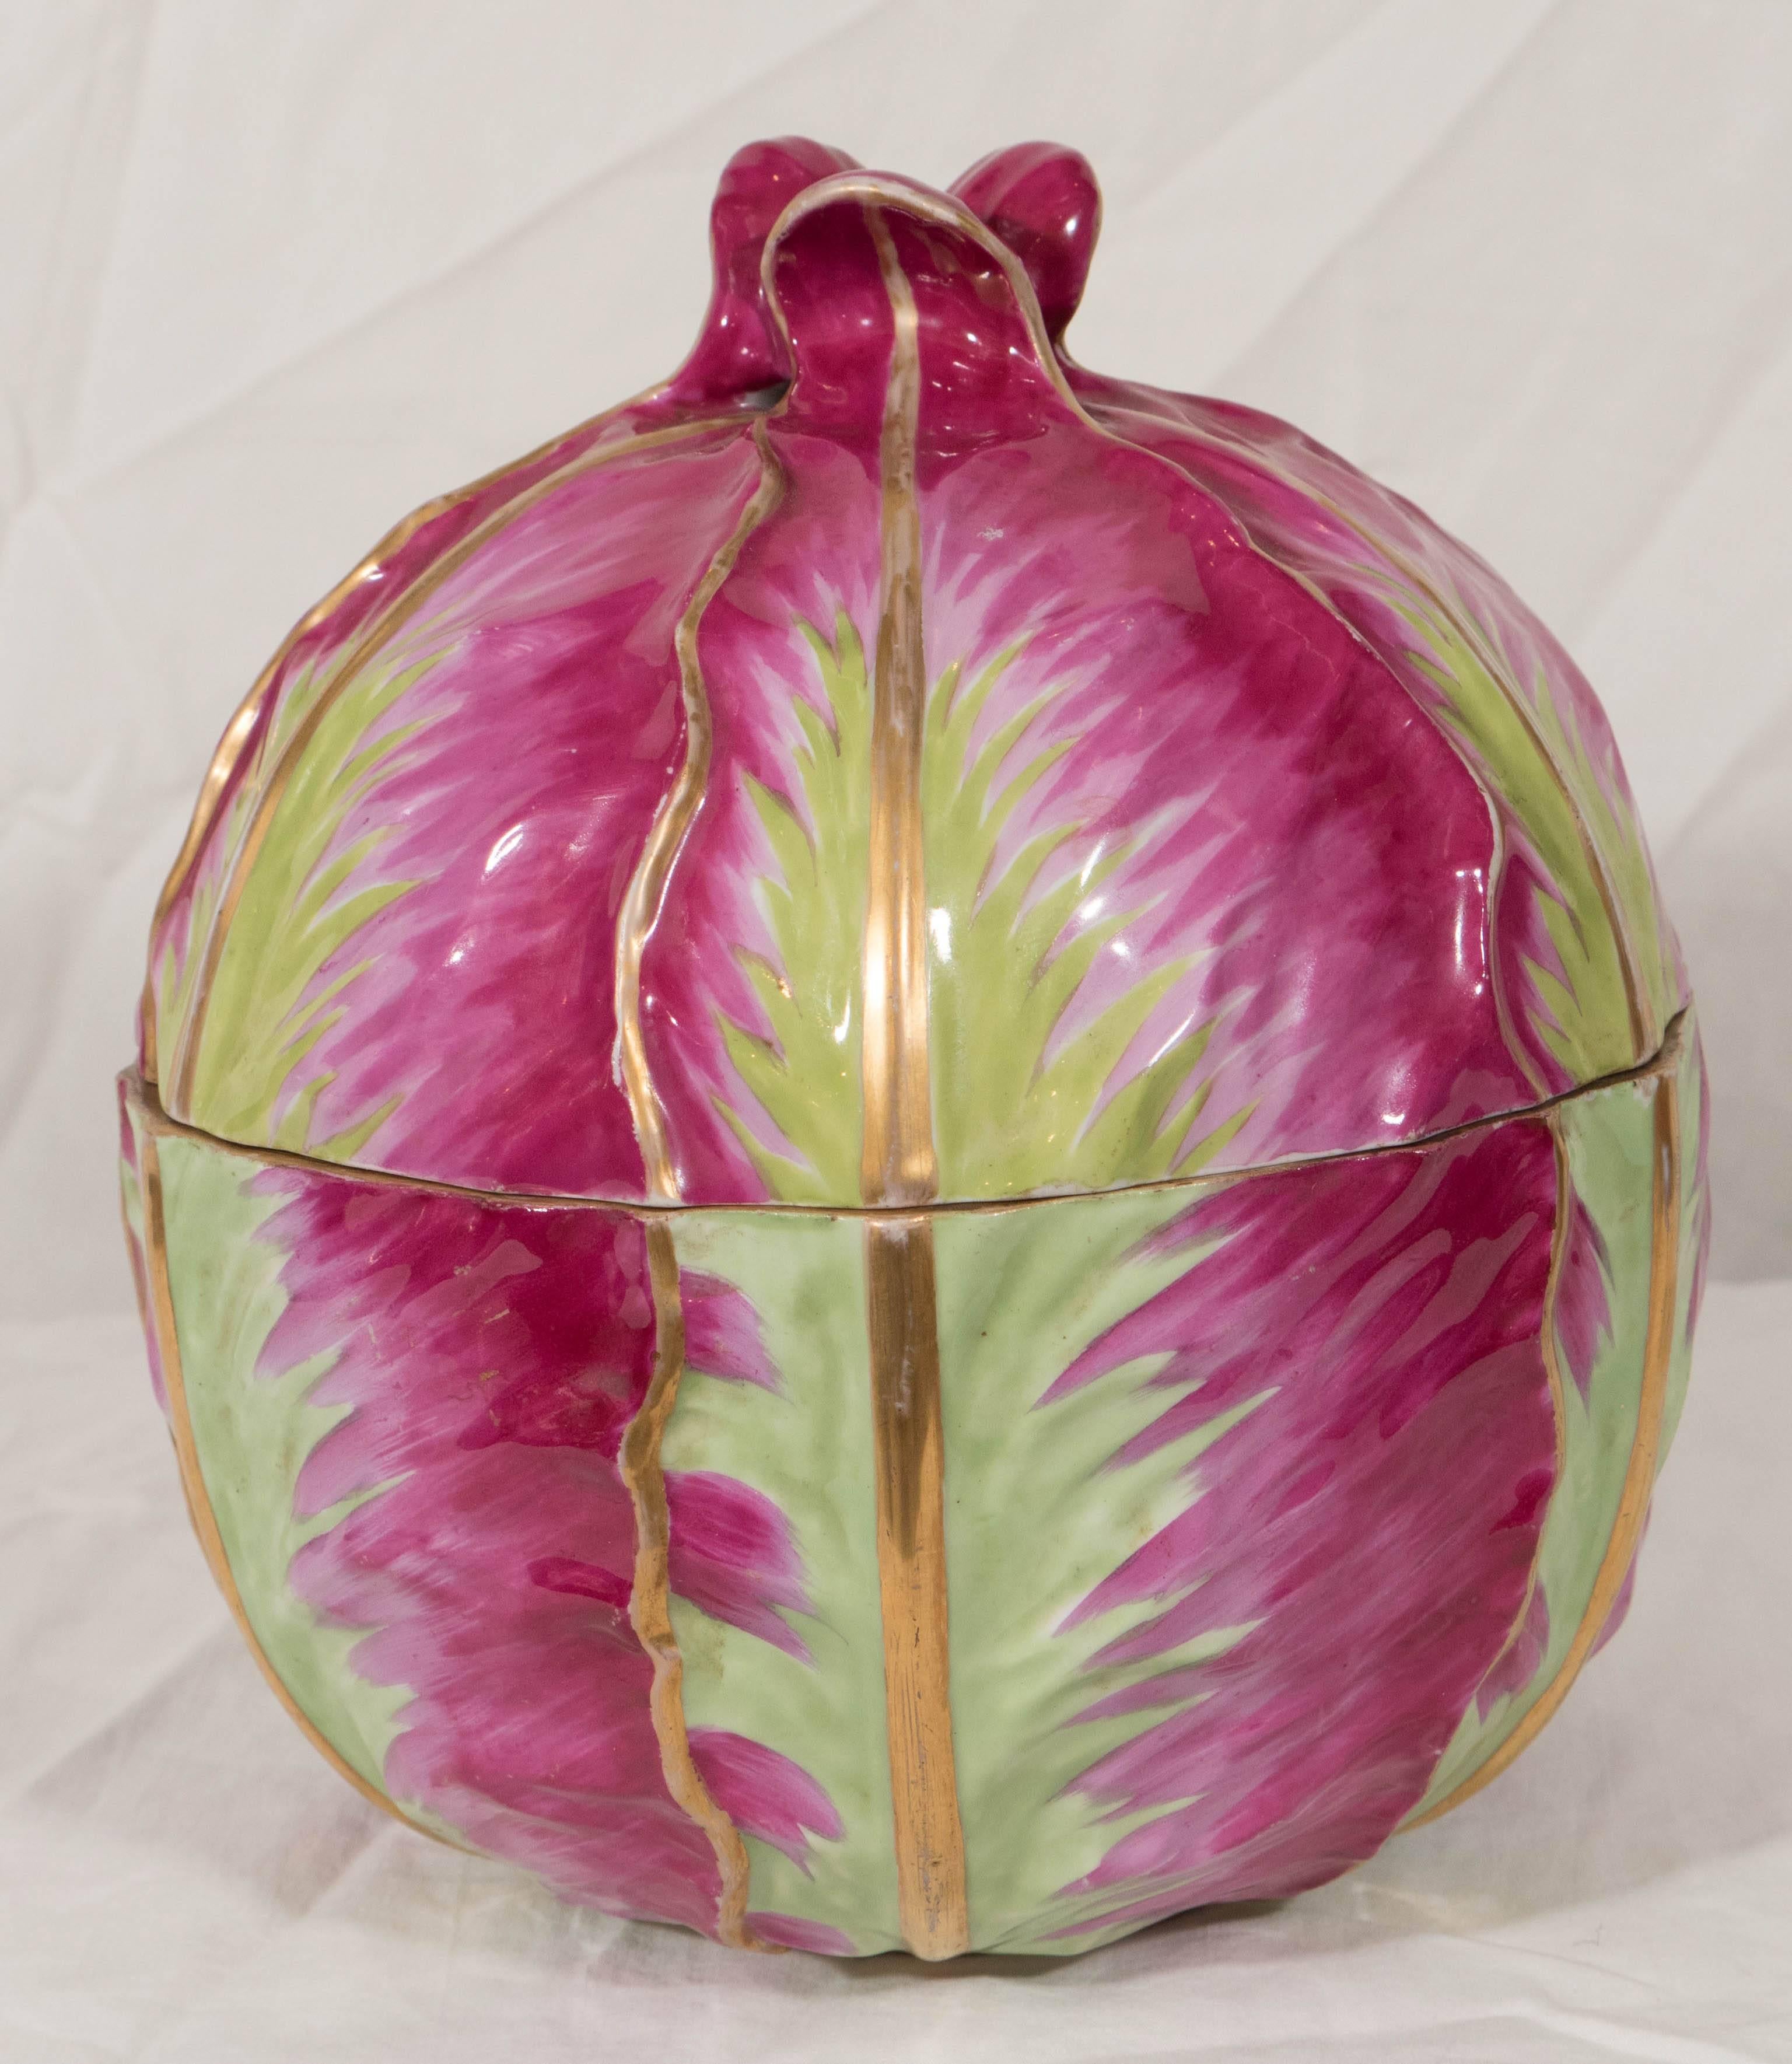 A Meissen tureen and stand modeled as a cabbage sitting on cabbage leaves decorated with an imaginative color combination of bright fuchsia and green.